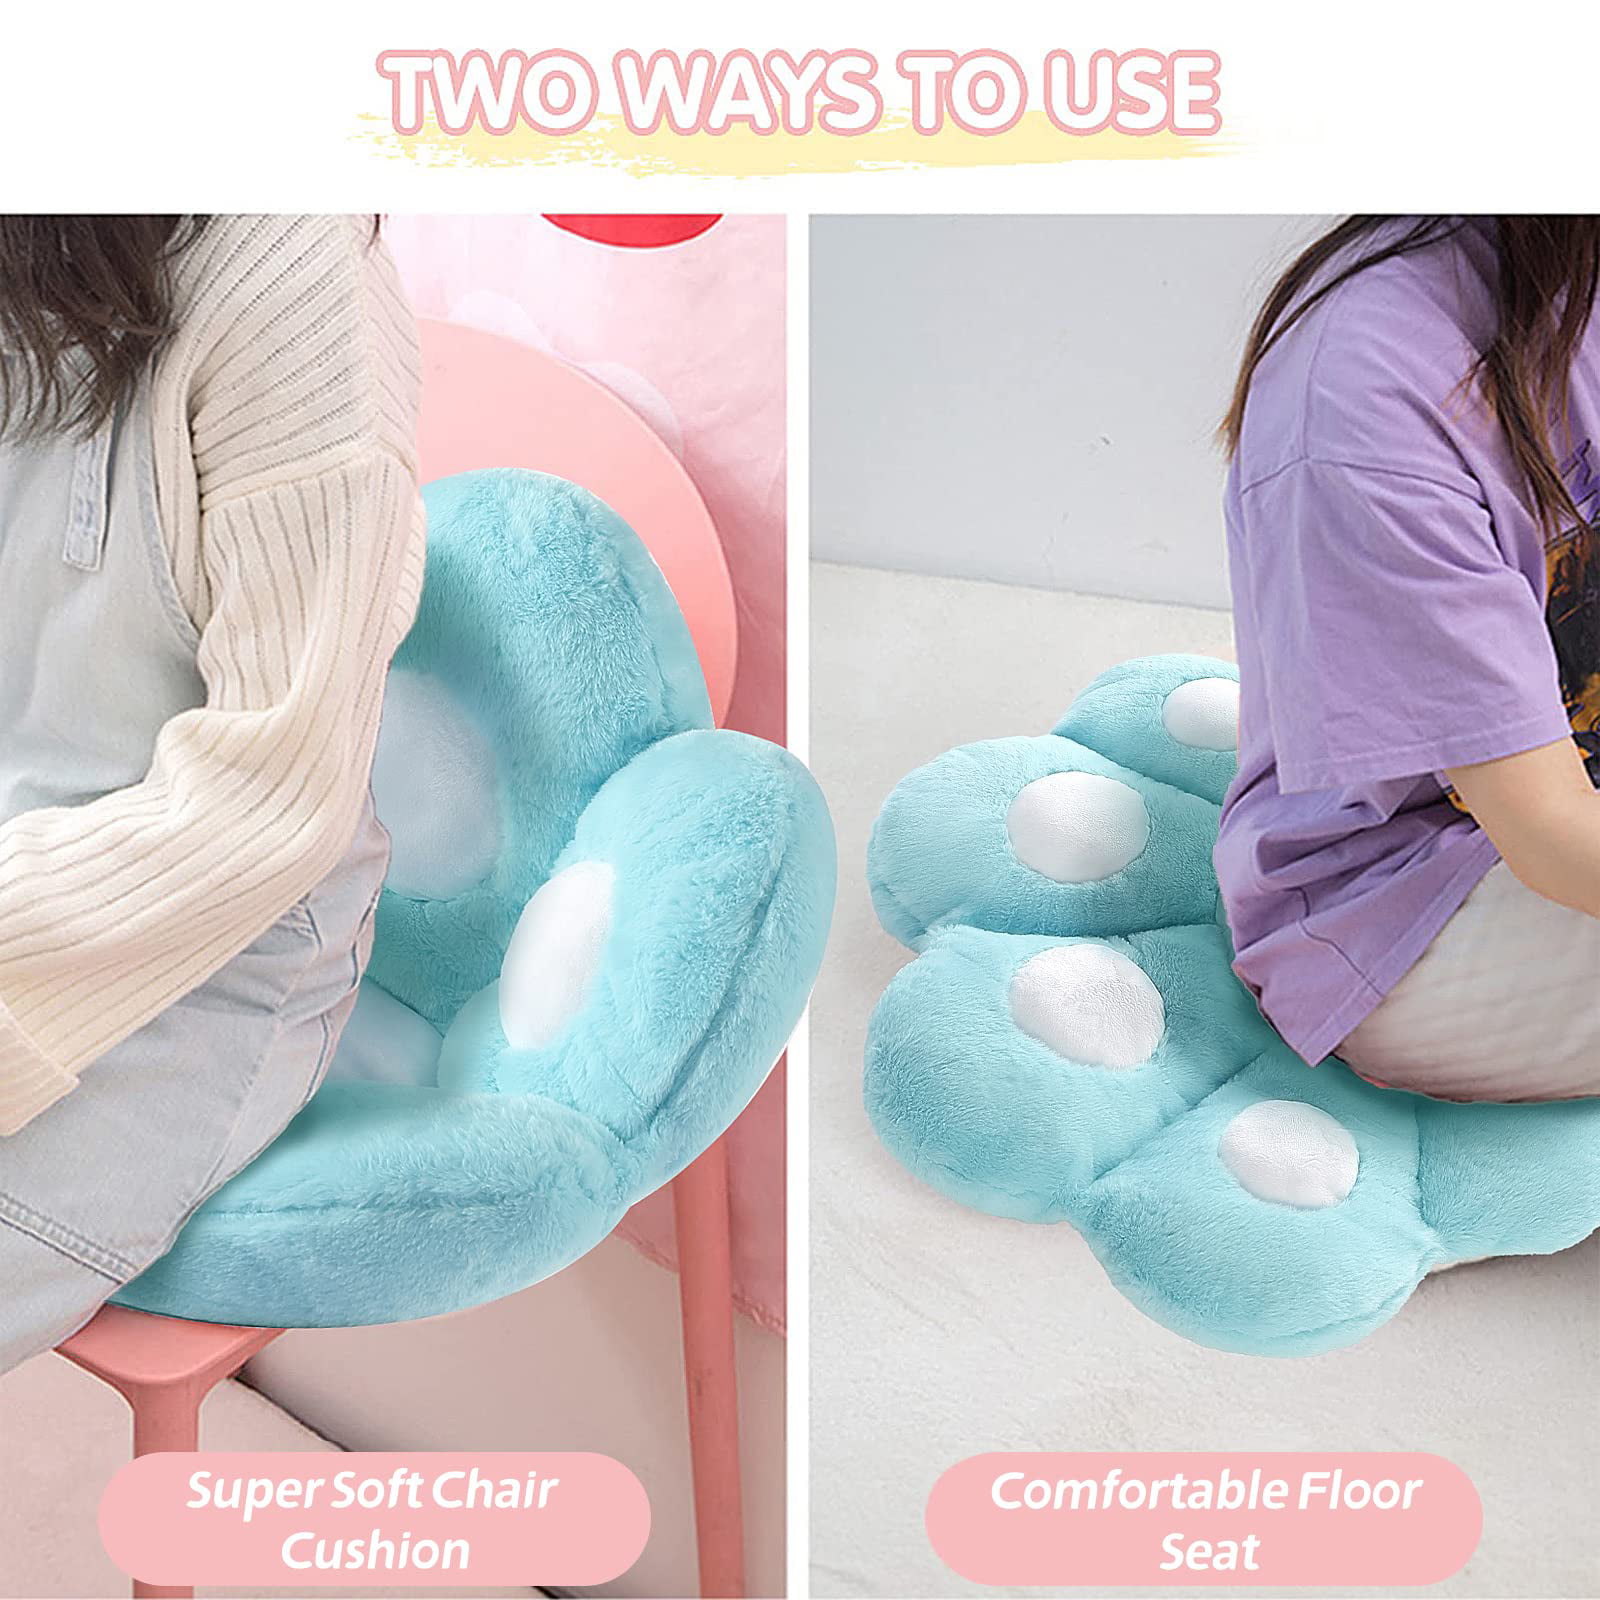 Cat Paw Cushion Comfy Kawaii Chair Cushion Bear Paw Lazy Sofa Office Floor  Pillow Cute Plush Seat Pad for Gaming Chair for Dining Room Bedroom Decor  Blue 27.5 x 23.6 inch 